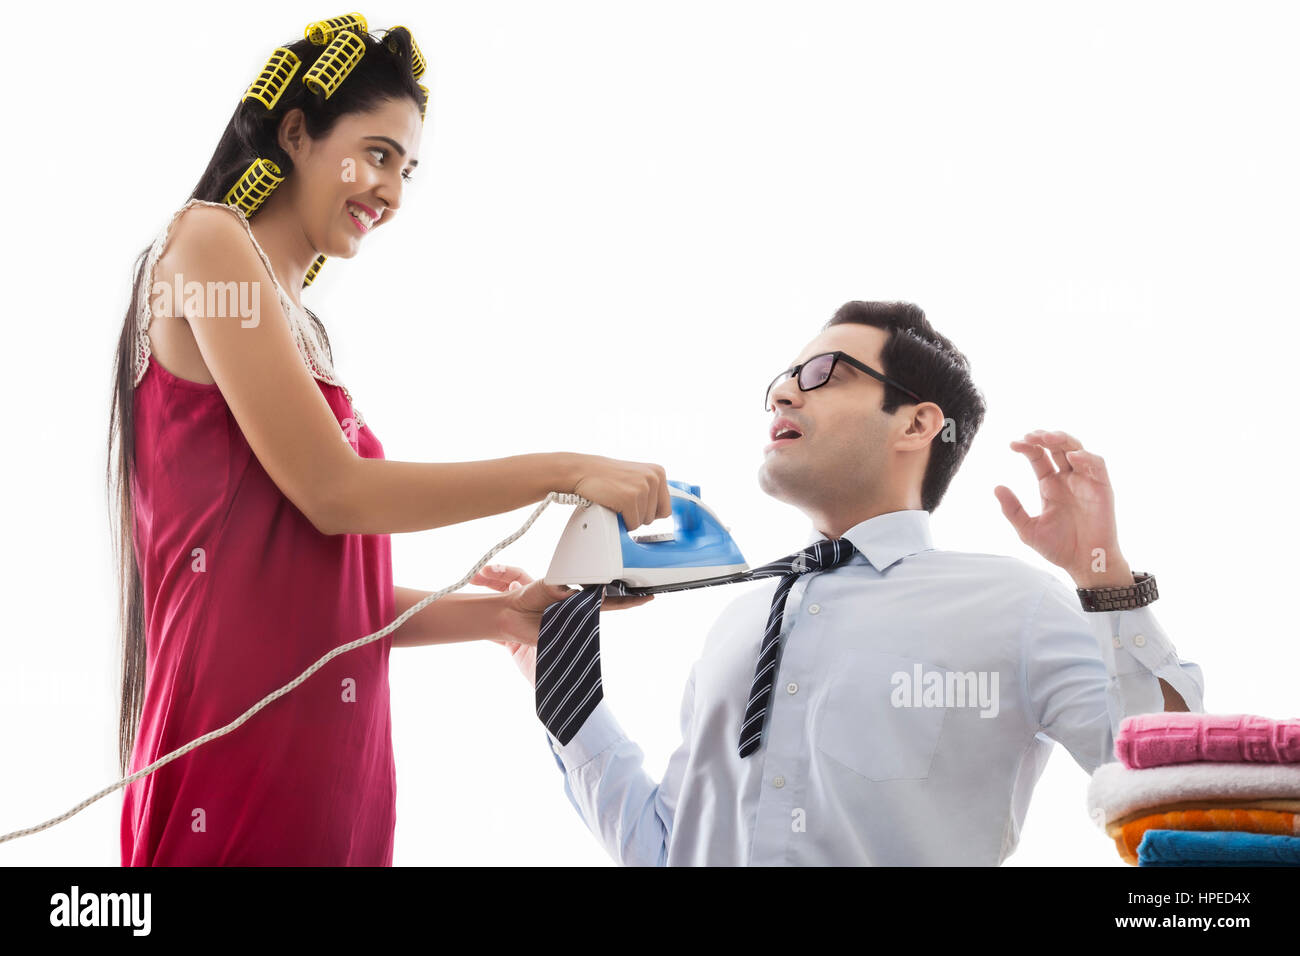 Young woman with curlers ironing man's tie Stock Photo